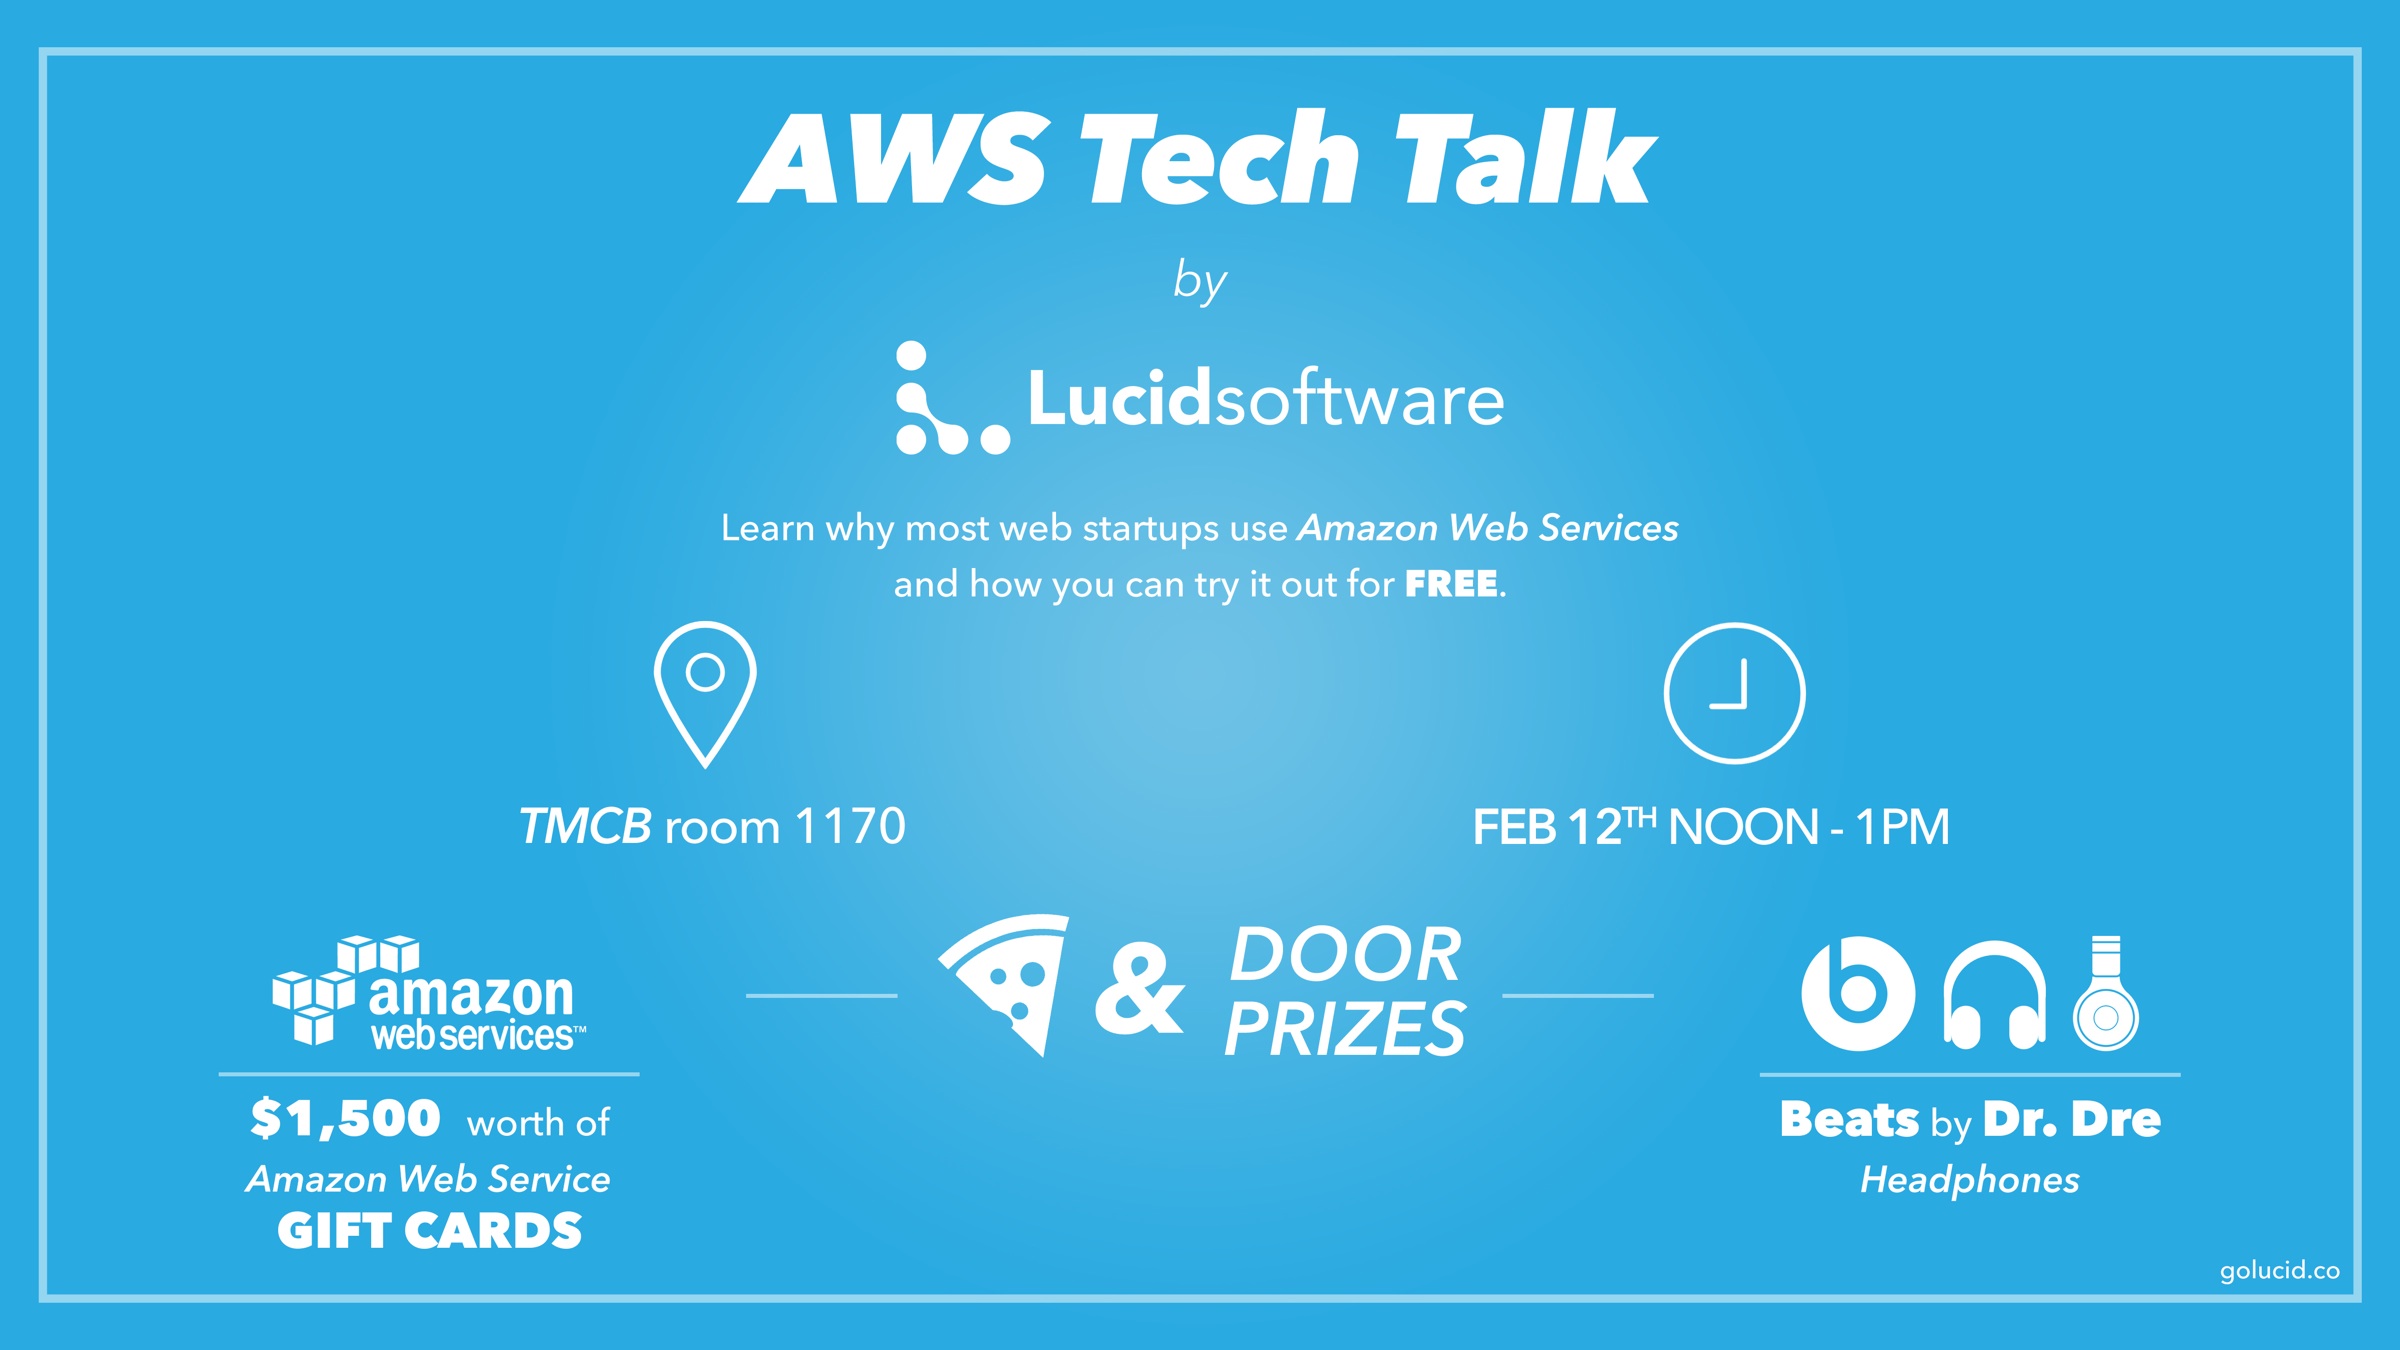 AWS Tech Talk Event by Lucid Software